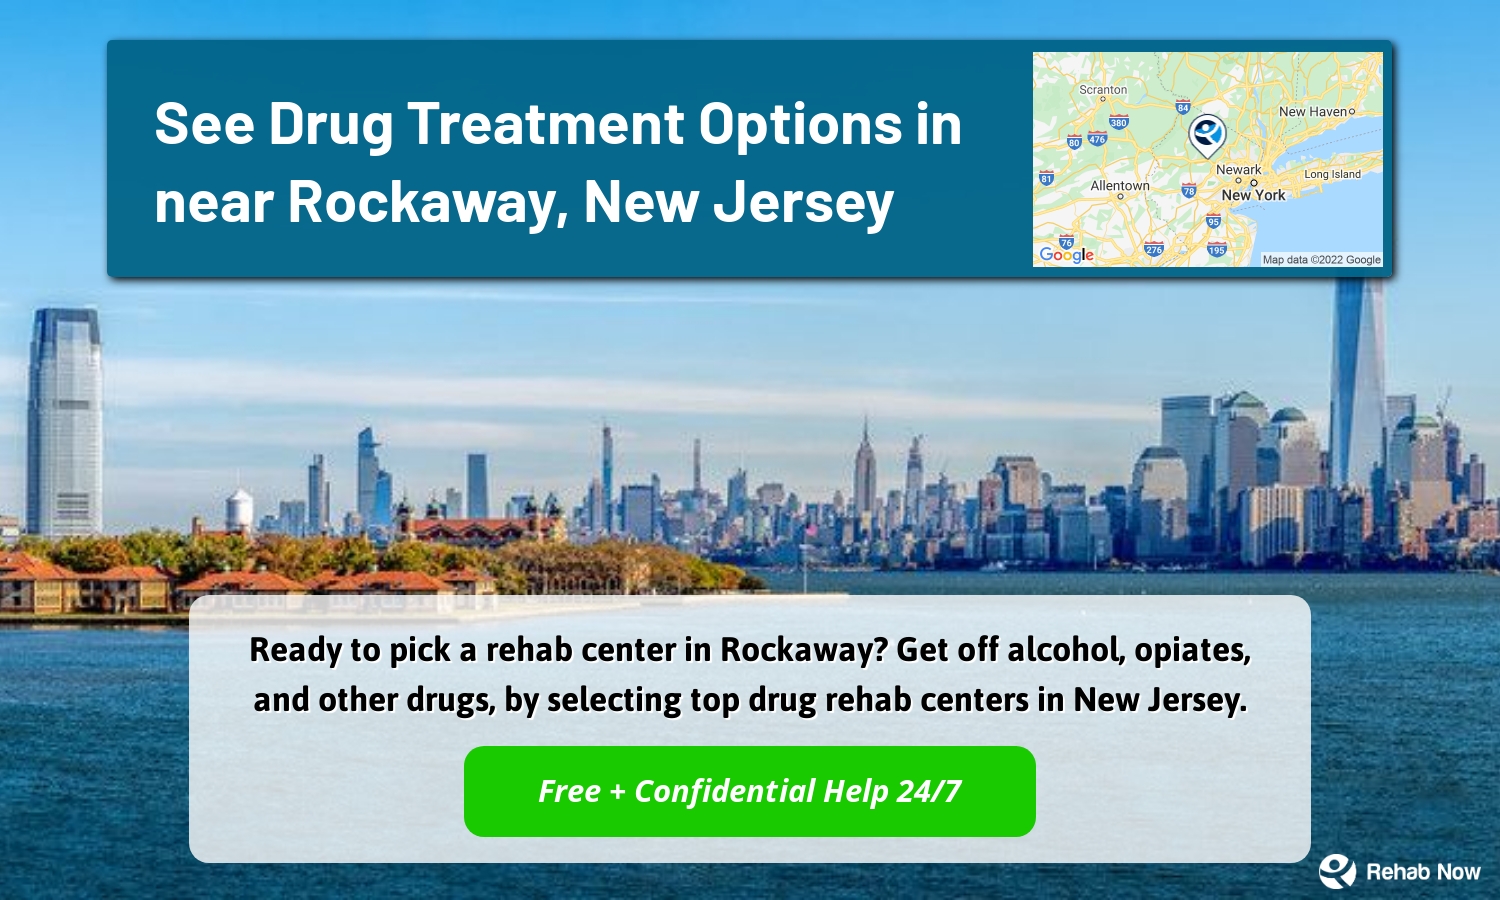 Ready to pick a rehab center in Rockaway? Get off alcohol, opiates, and other drugs, by selecting top drug rehab centers in New Jersey.